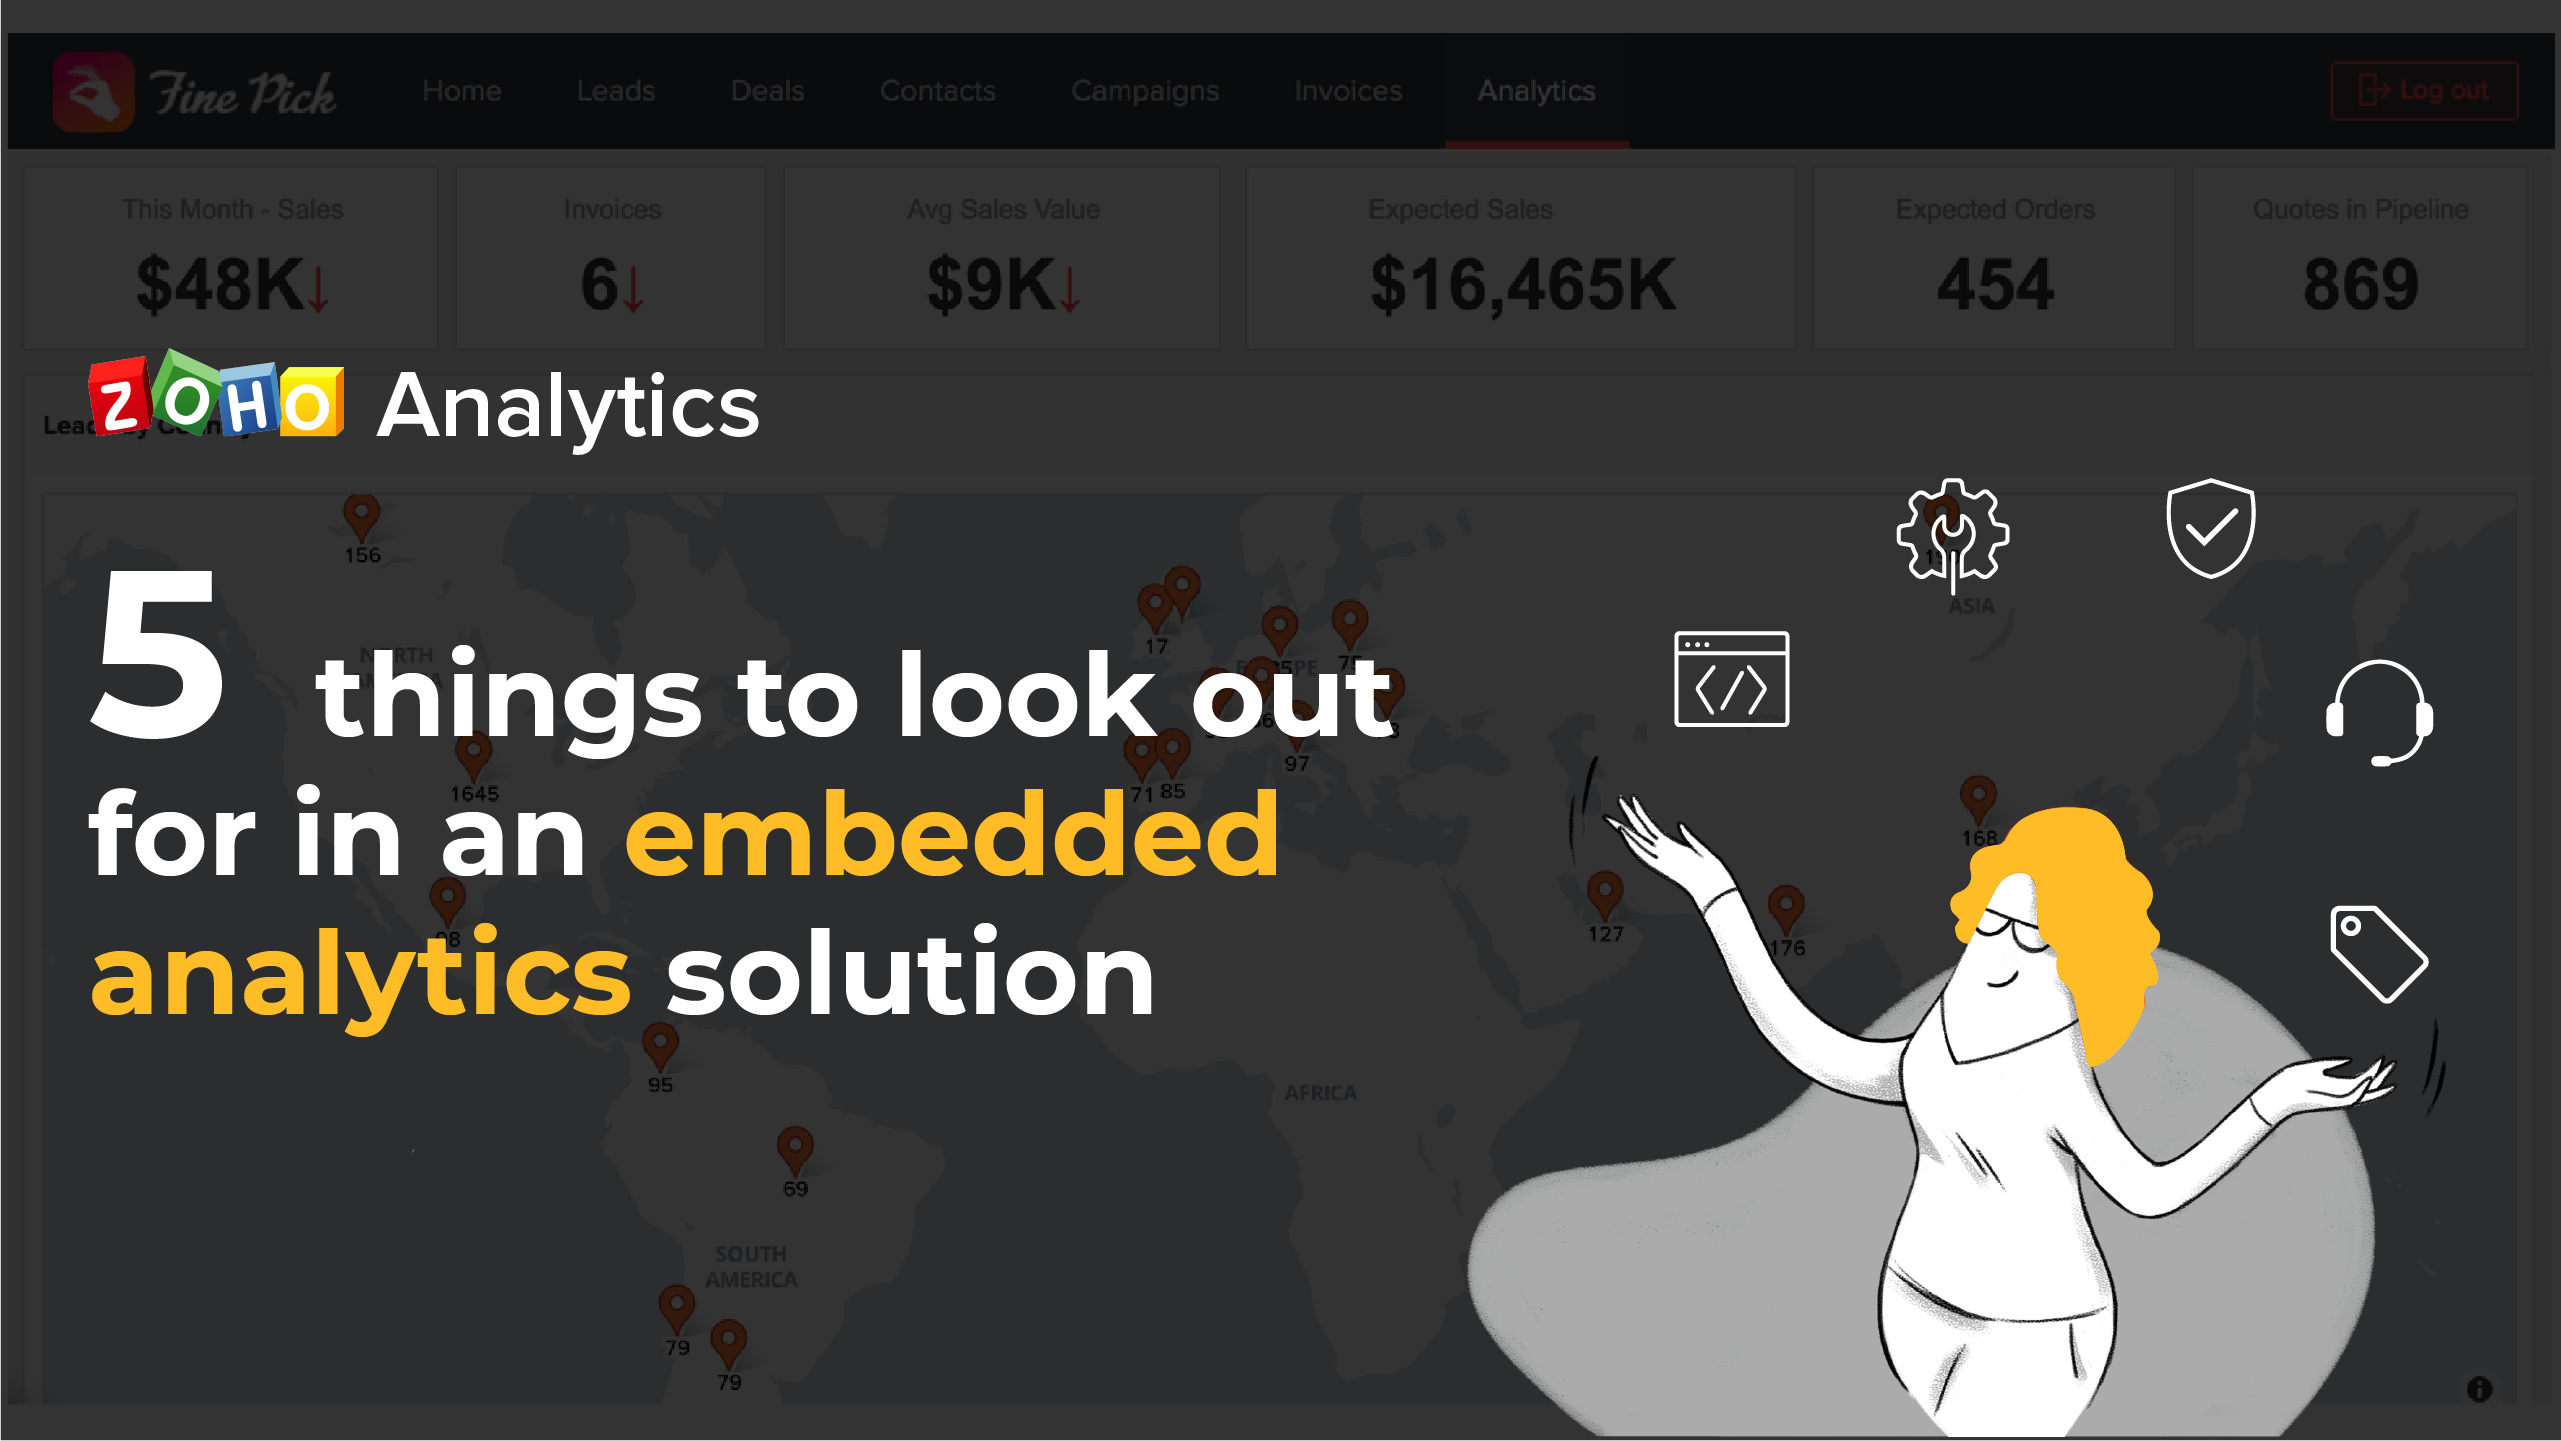 5 Things To Look Out For In an Embedded Analytics Solution